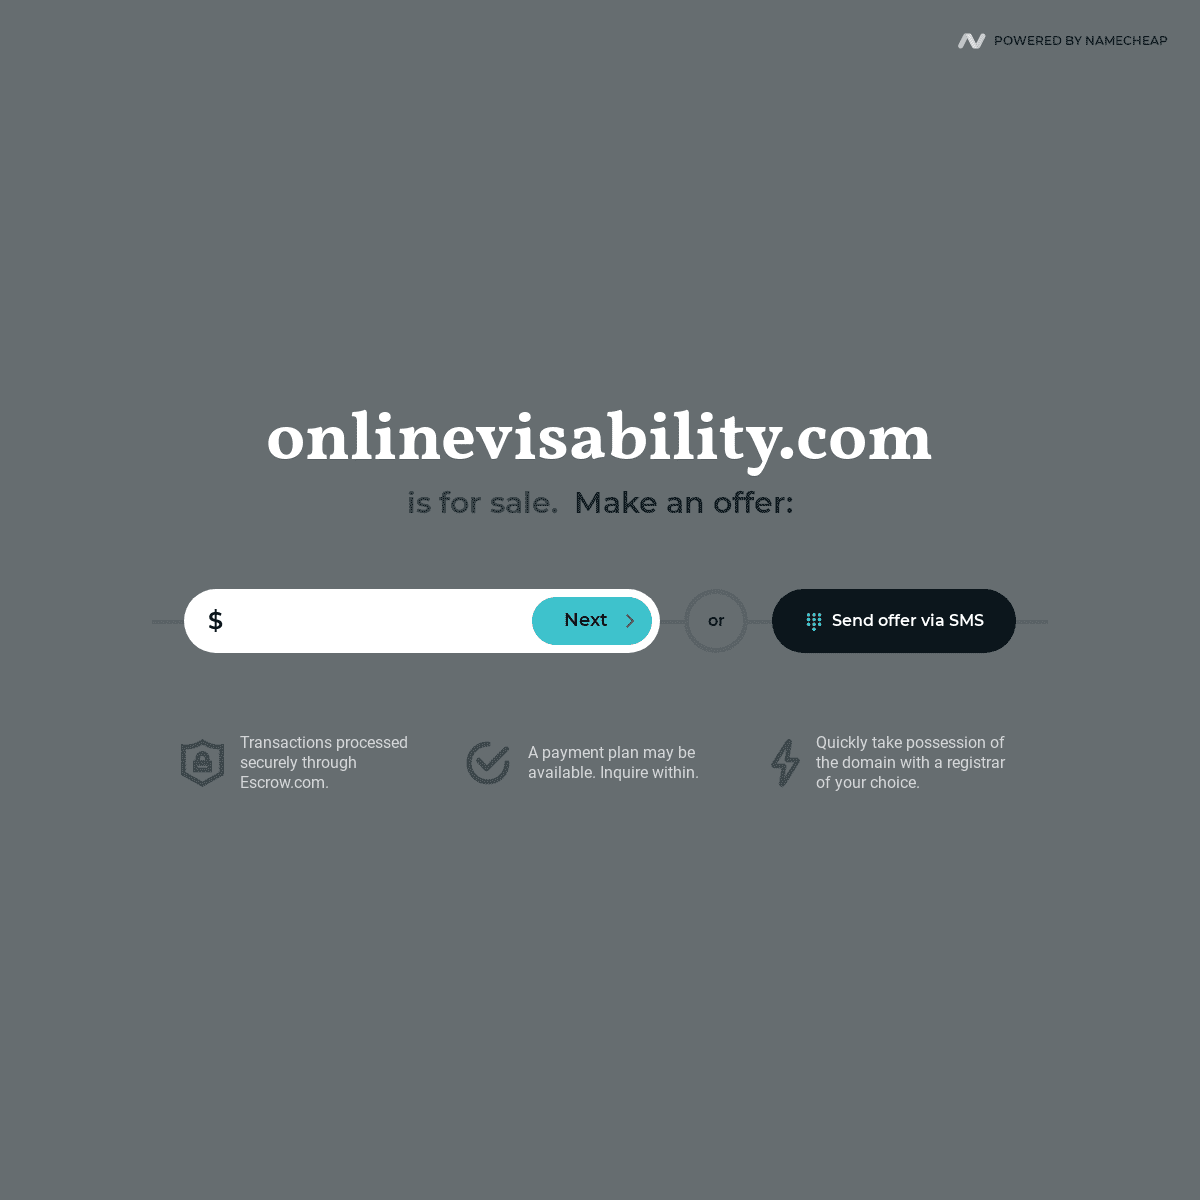 A complete backup of https://onlinevisability.com